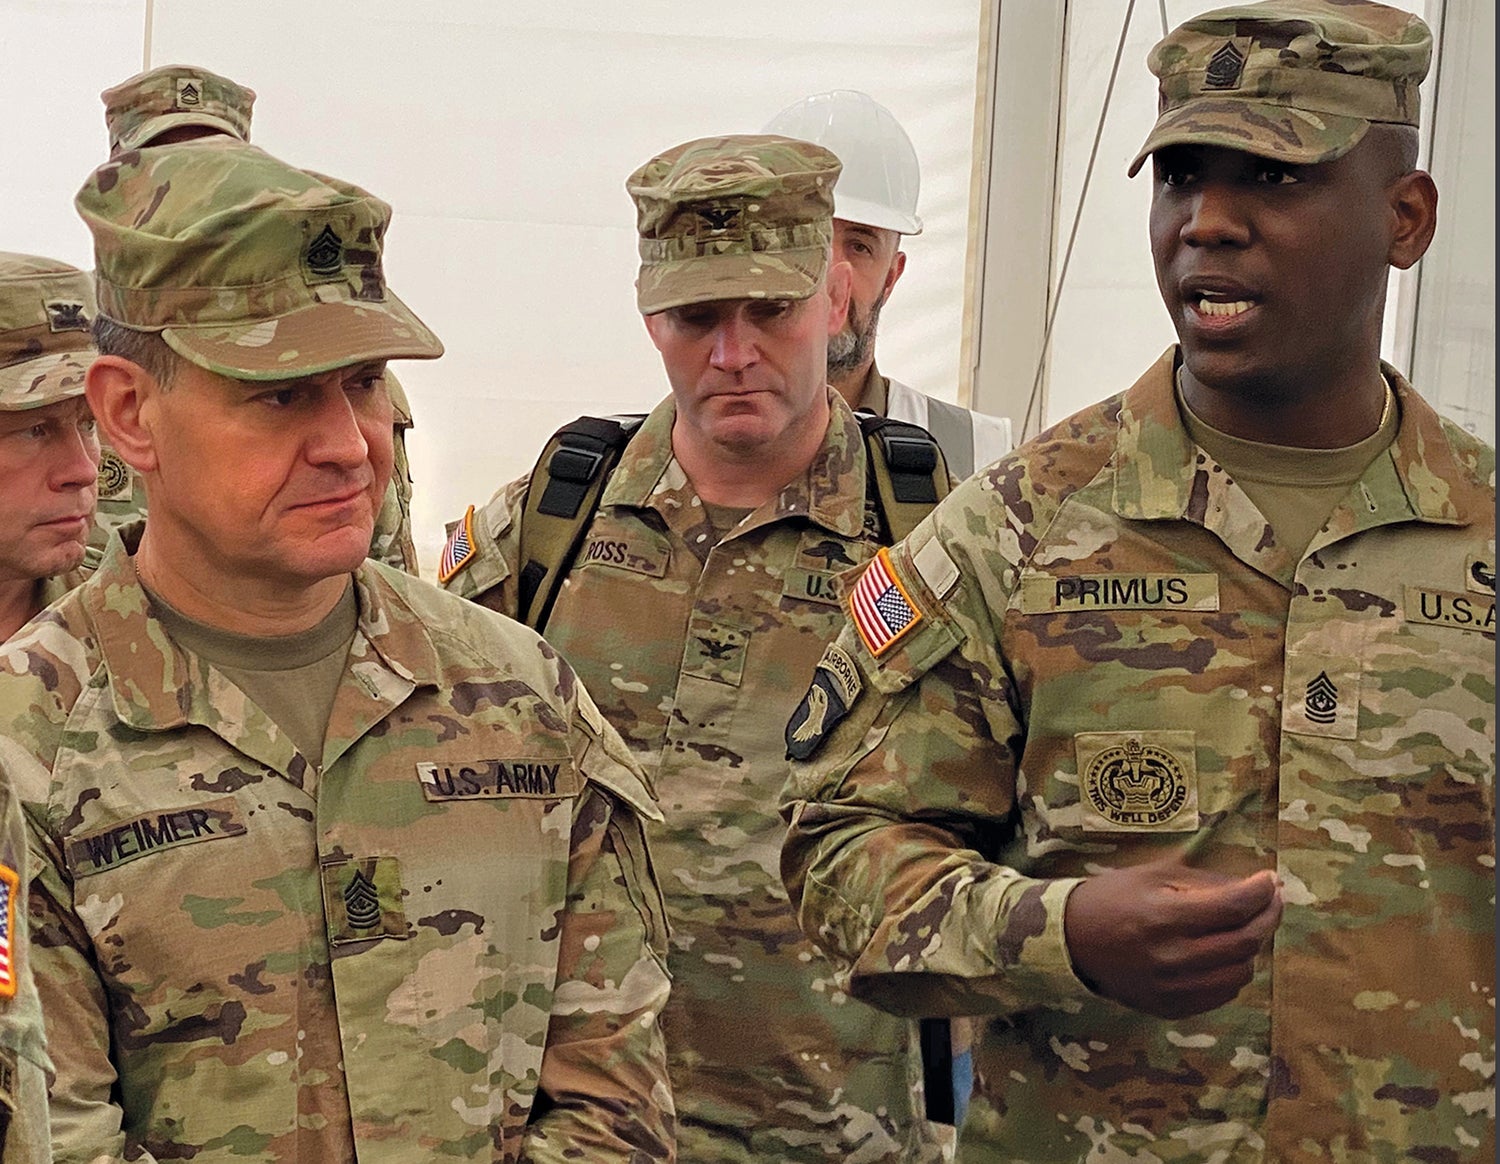 Weimer, left, listens to a briefing from Command Sgt. Maj. Kofie Primus, right, of the 21st Theater Sustainment Command, during a visit to a work site in Mannheim, Germany. (Credit: U.S. Army/Cameron Porter)